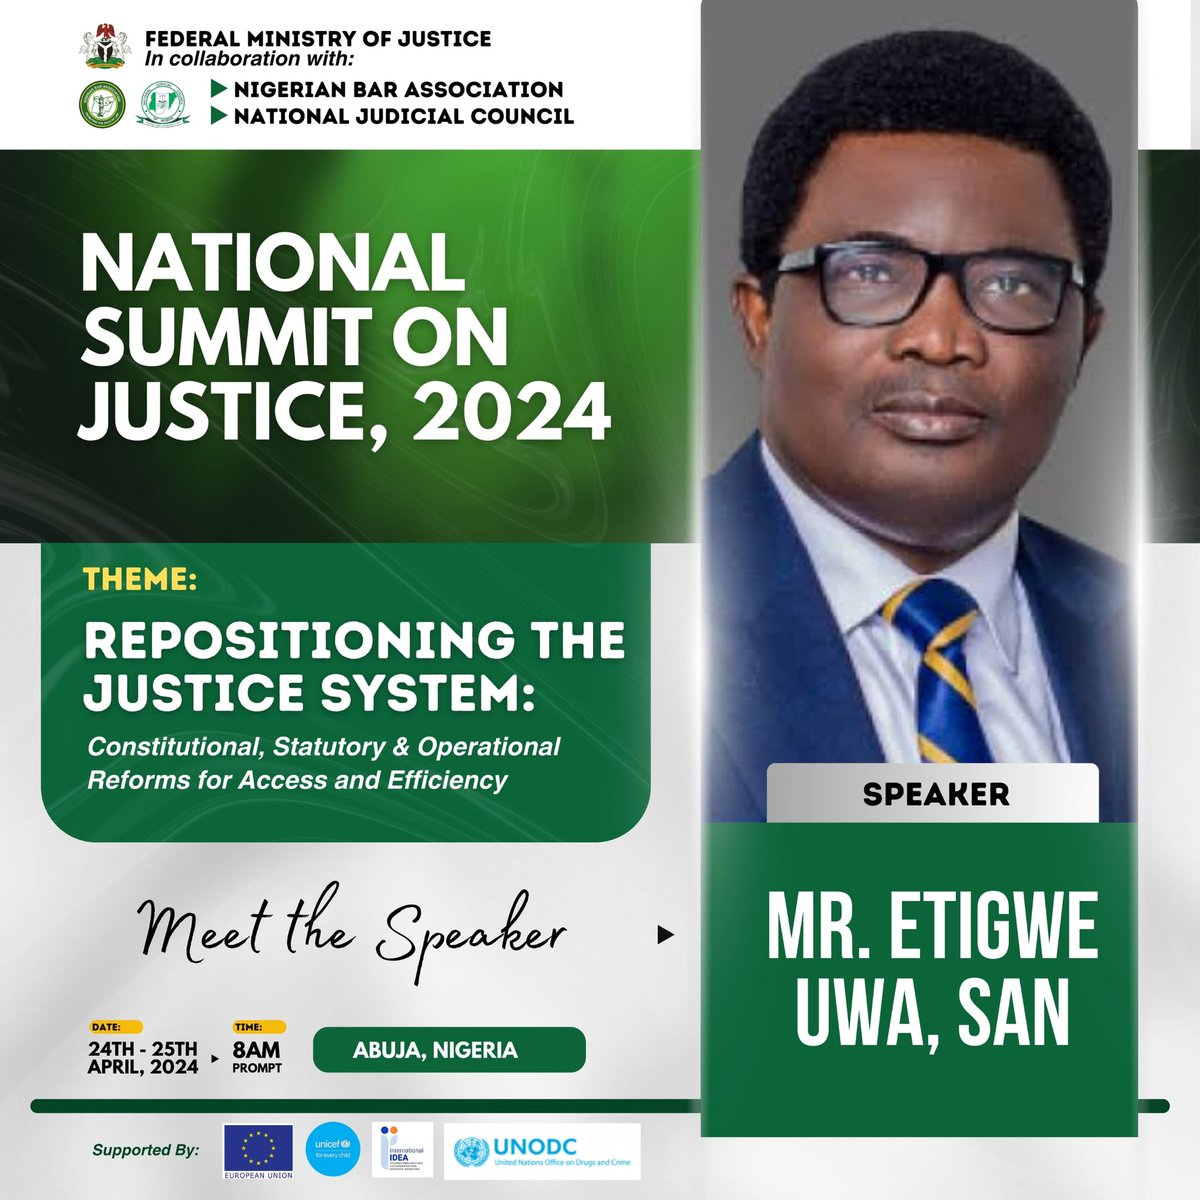 Other speakers at the National Summit on Justice include the following;